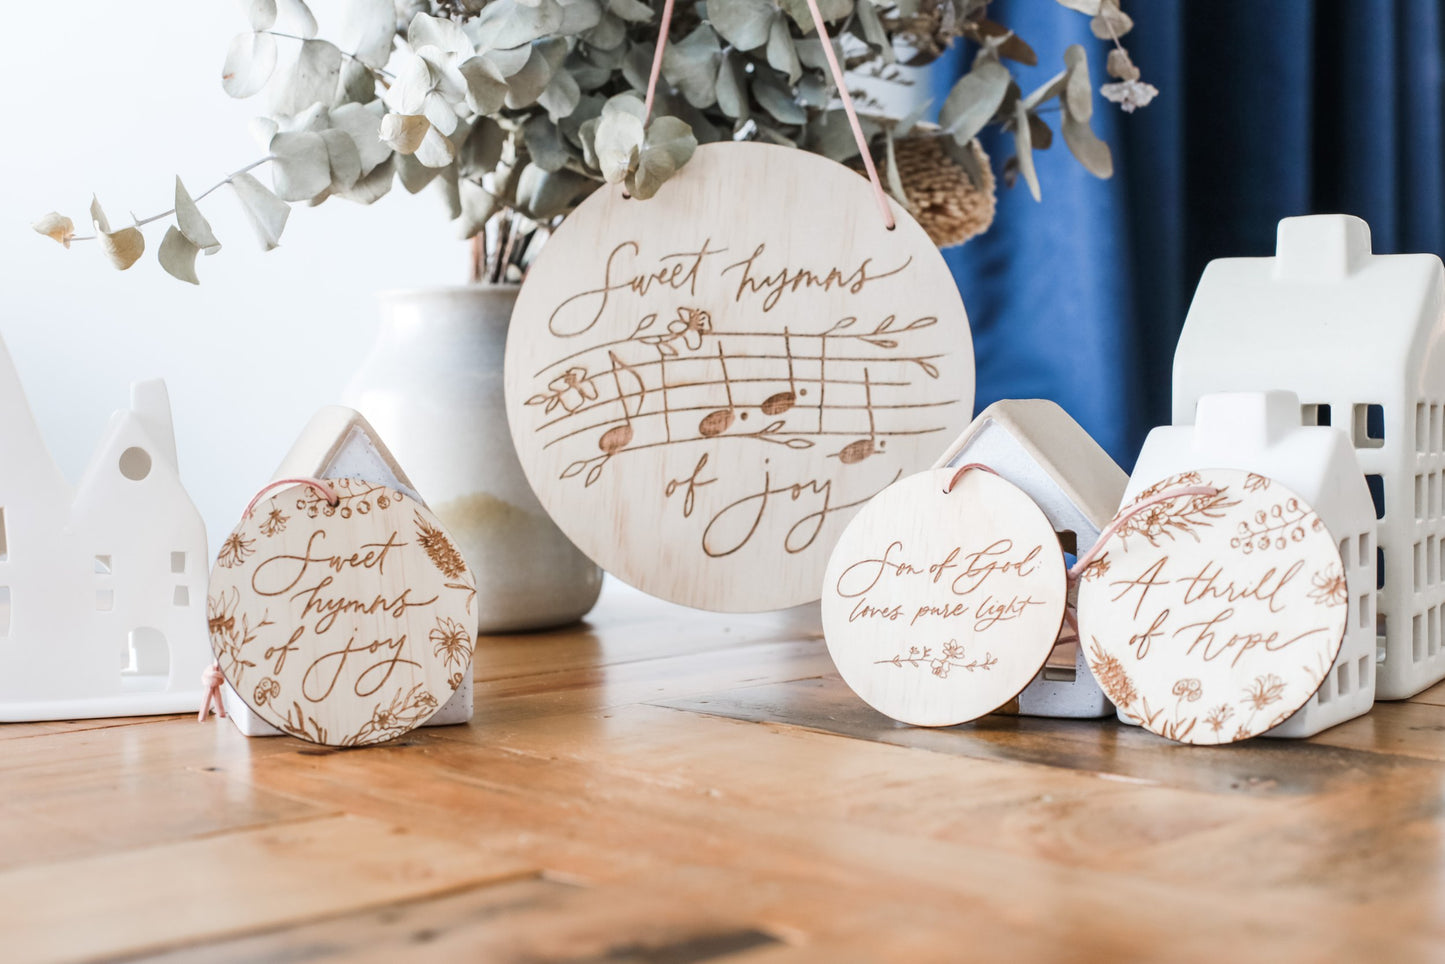 'Sweet Hymns of Joy' LIMITED EDITION Wall Hanging